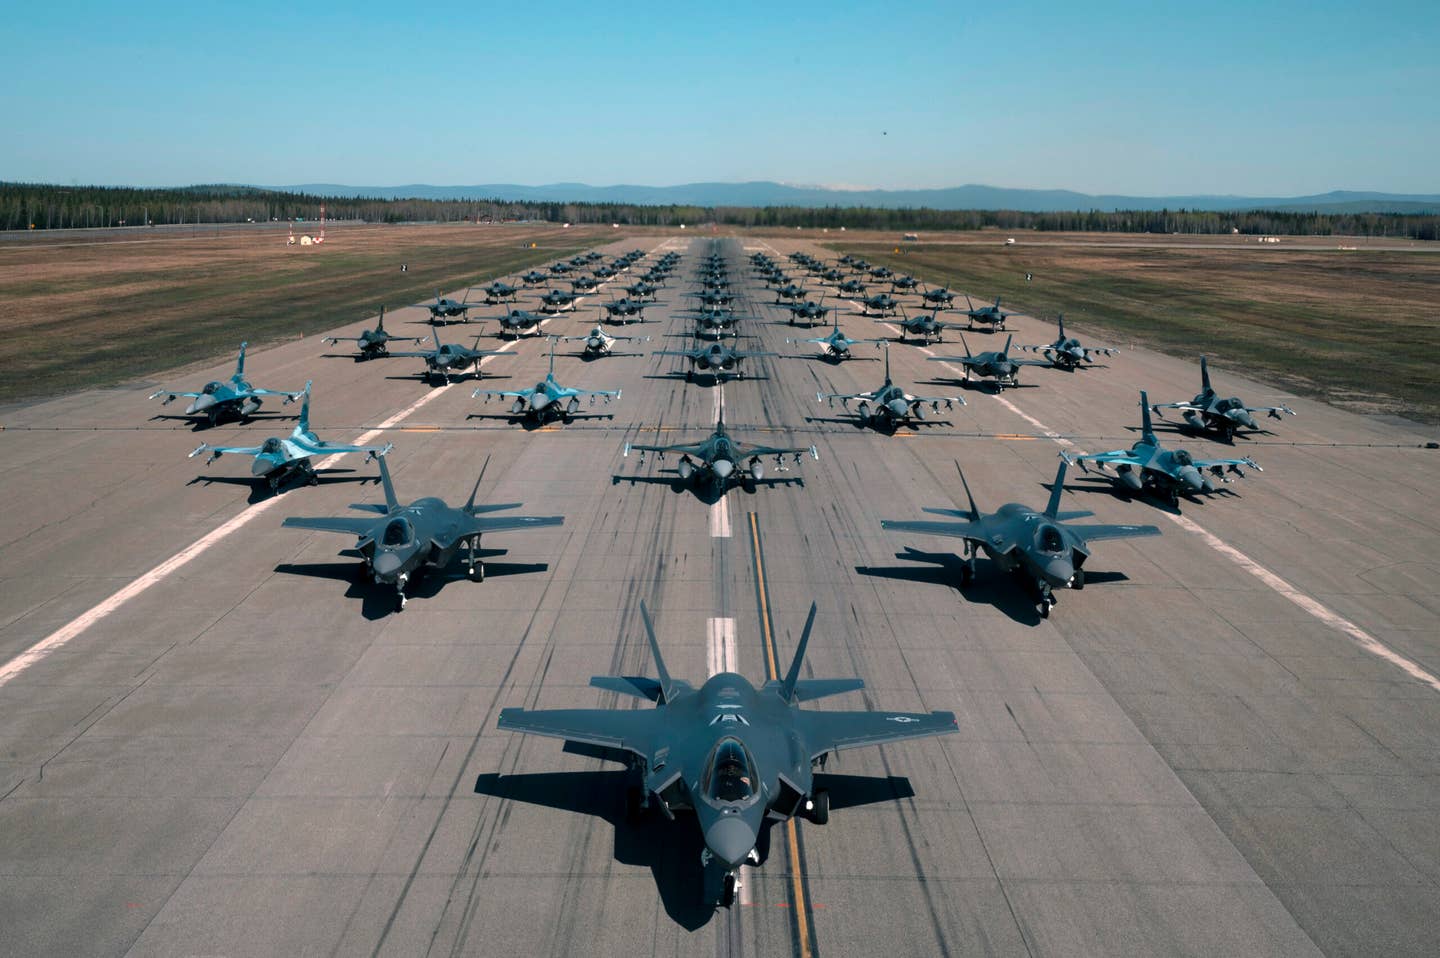 A formation of F-35A Lightning IIs and F-16 Fighting Falcons assigned to the 354th Fighter Wing assemble during a routine readiness exercise at Eielson Air Force Base, Alaska, May 20, 2022. (U.S. Air Force photo by Airman 1st Class Elizabeth Schoubroek)